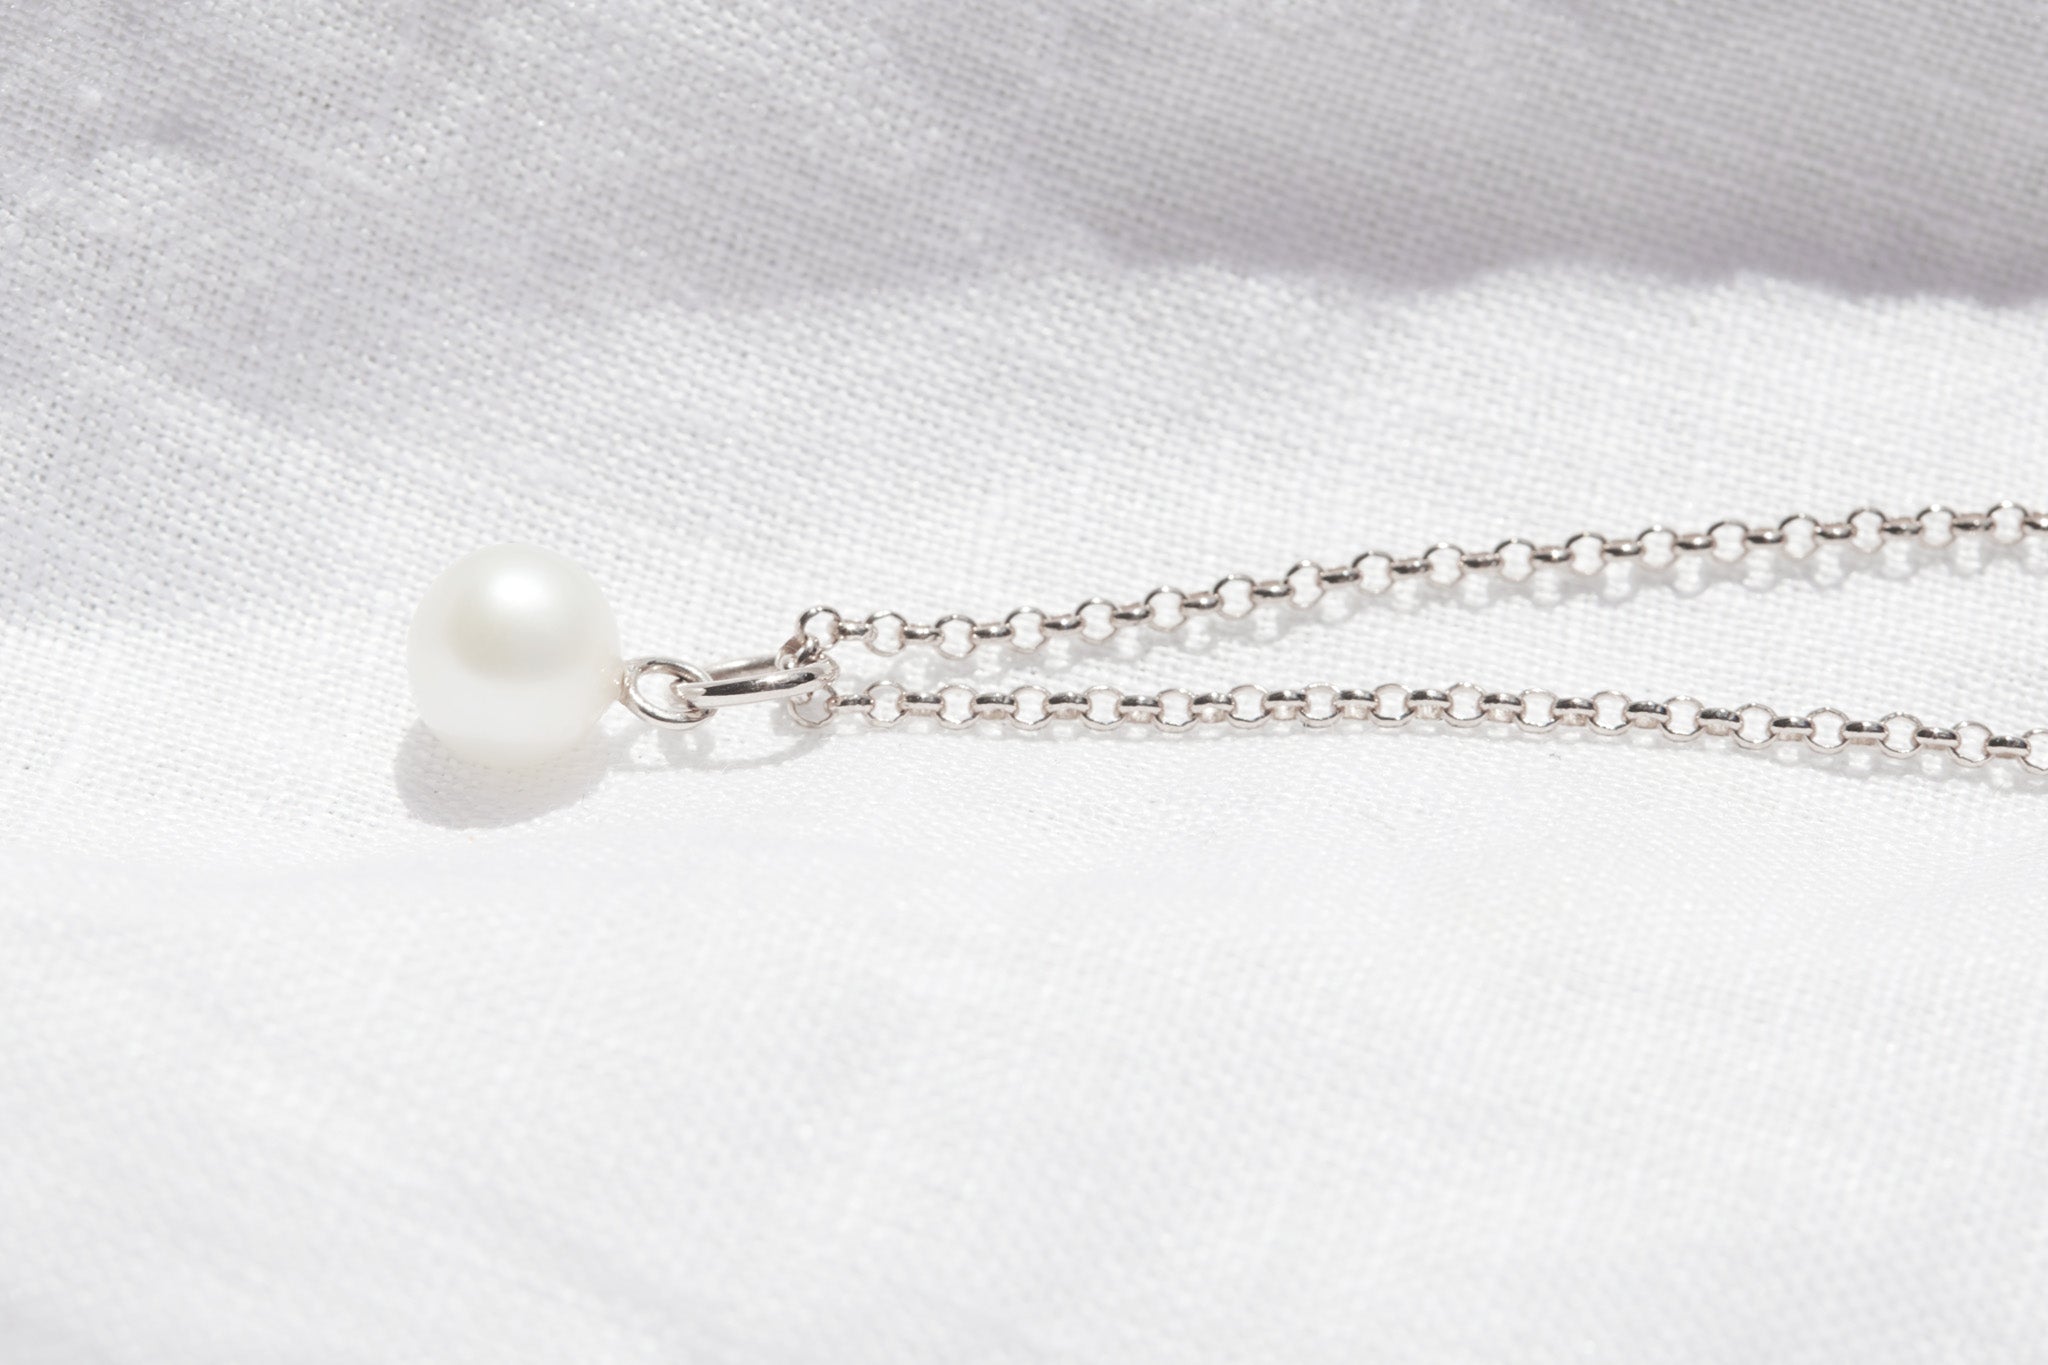 Avery Freshwater Pearl Pendant in 925 Sterling Silver